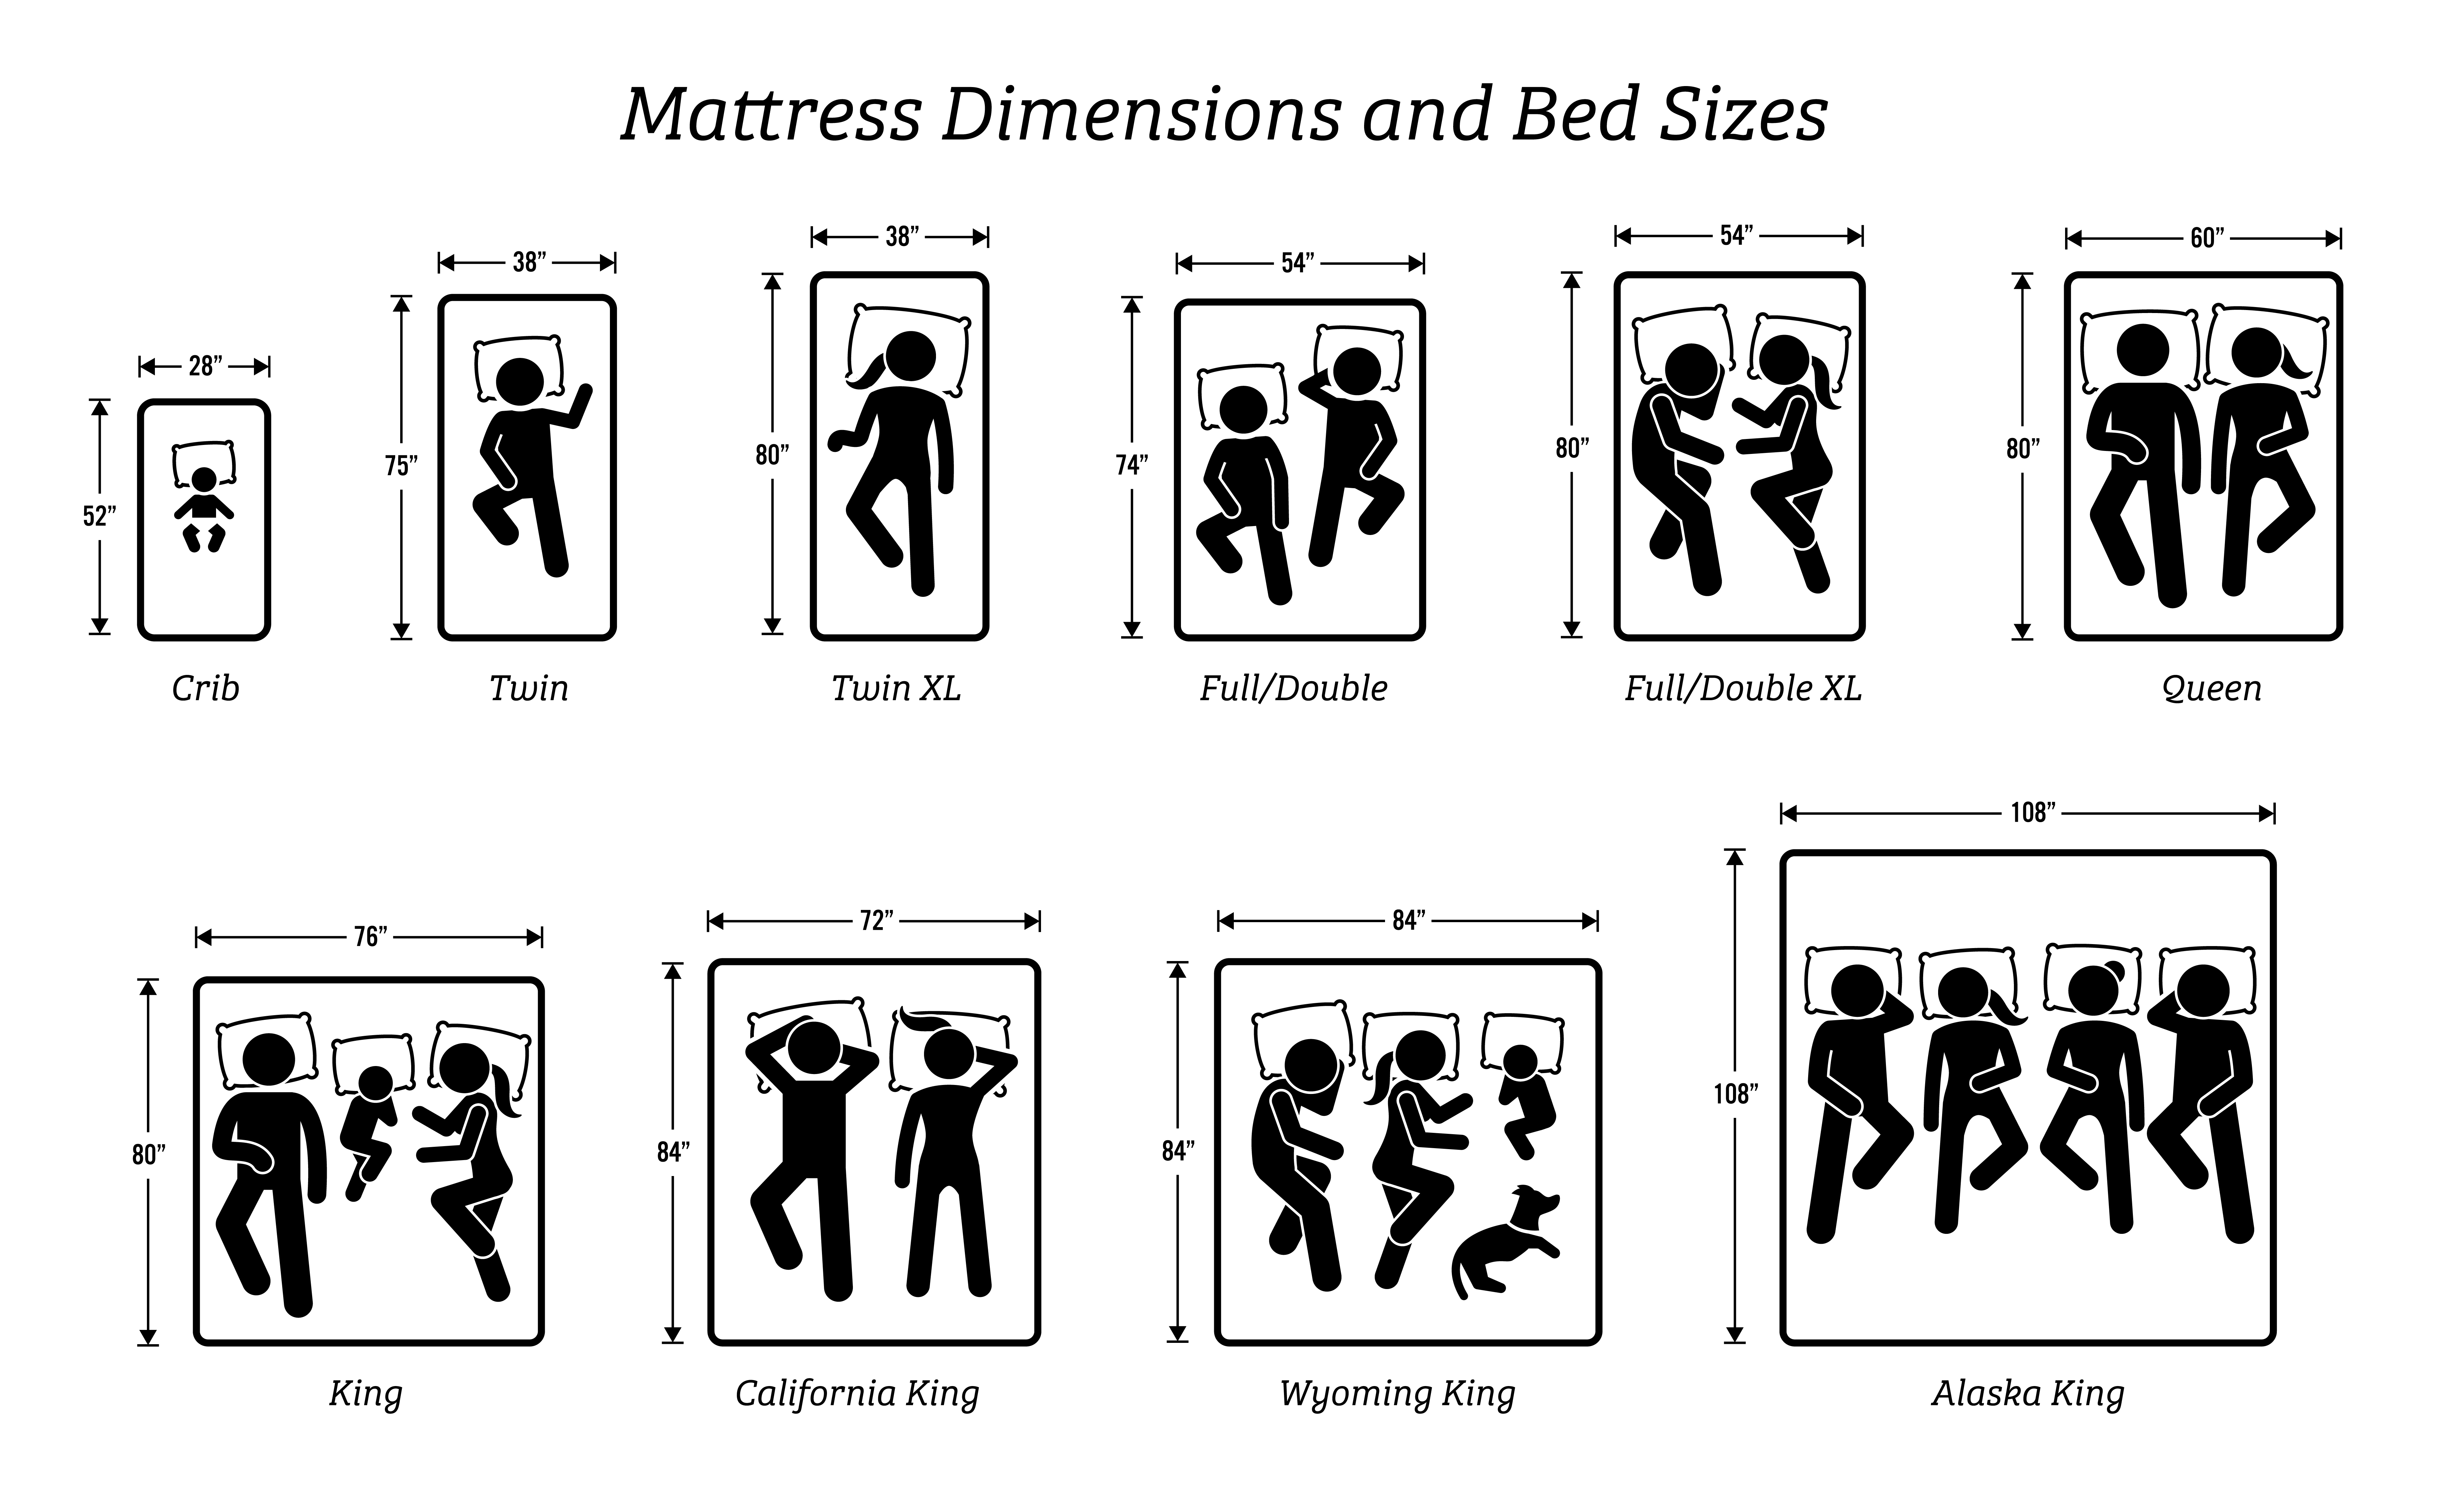 Different Sizes of Mattresses